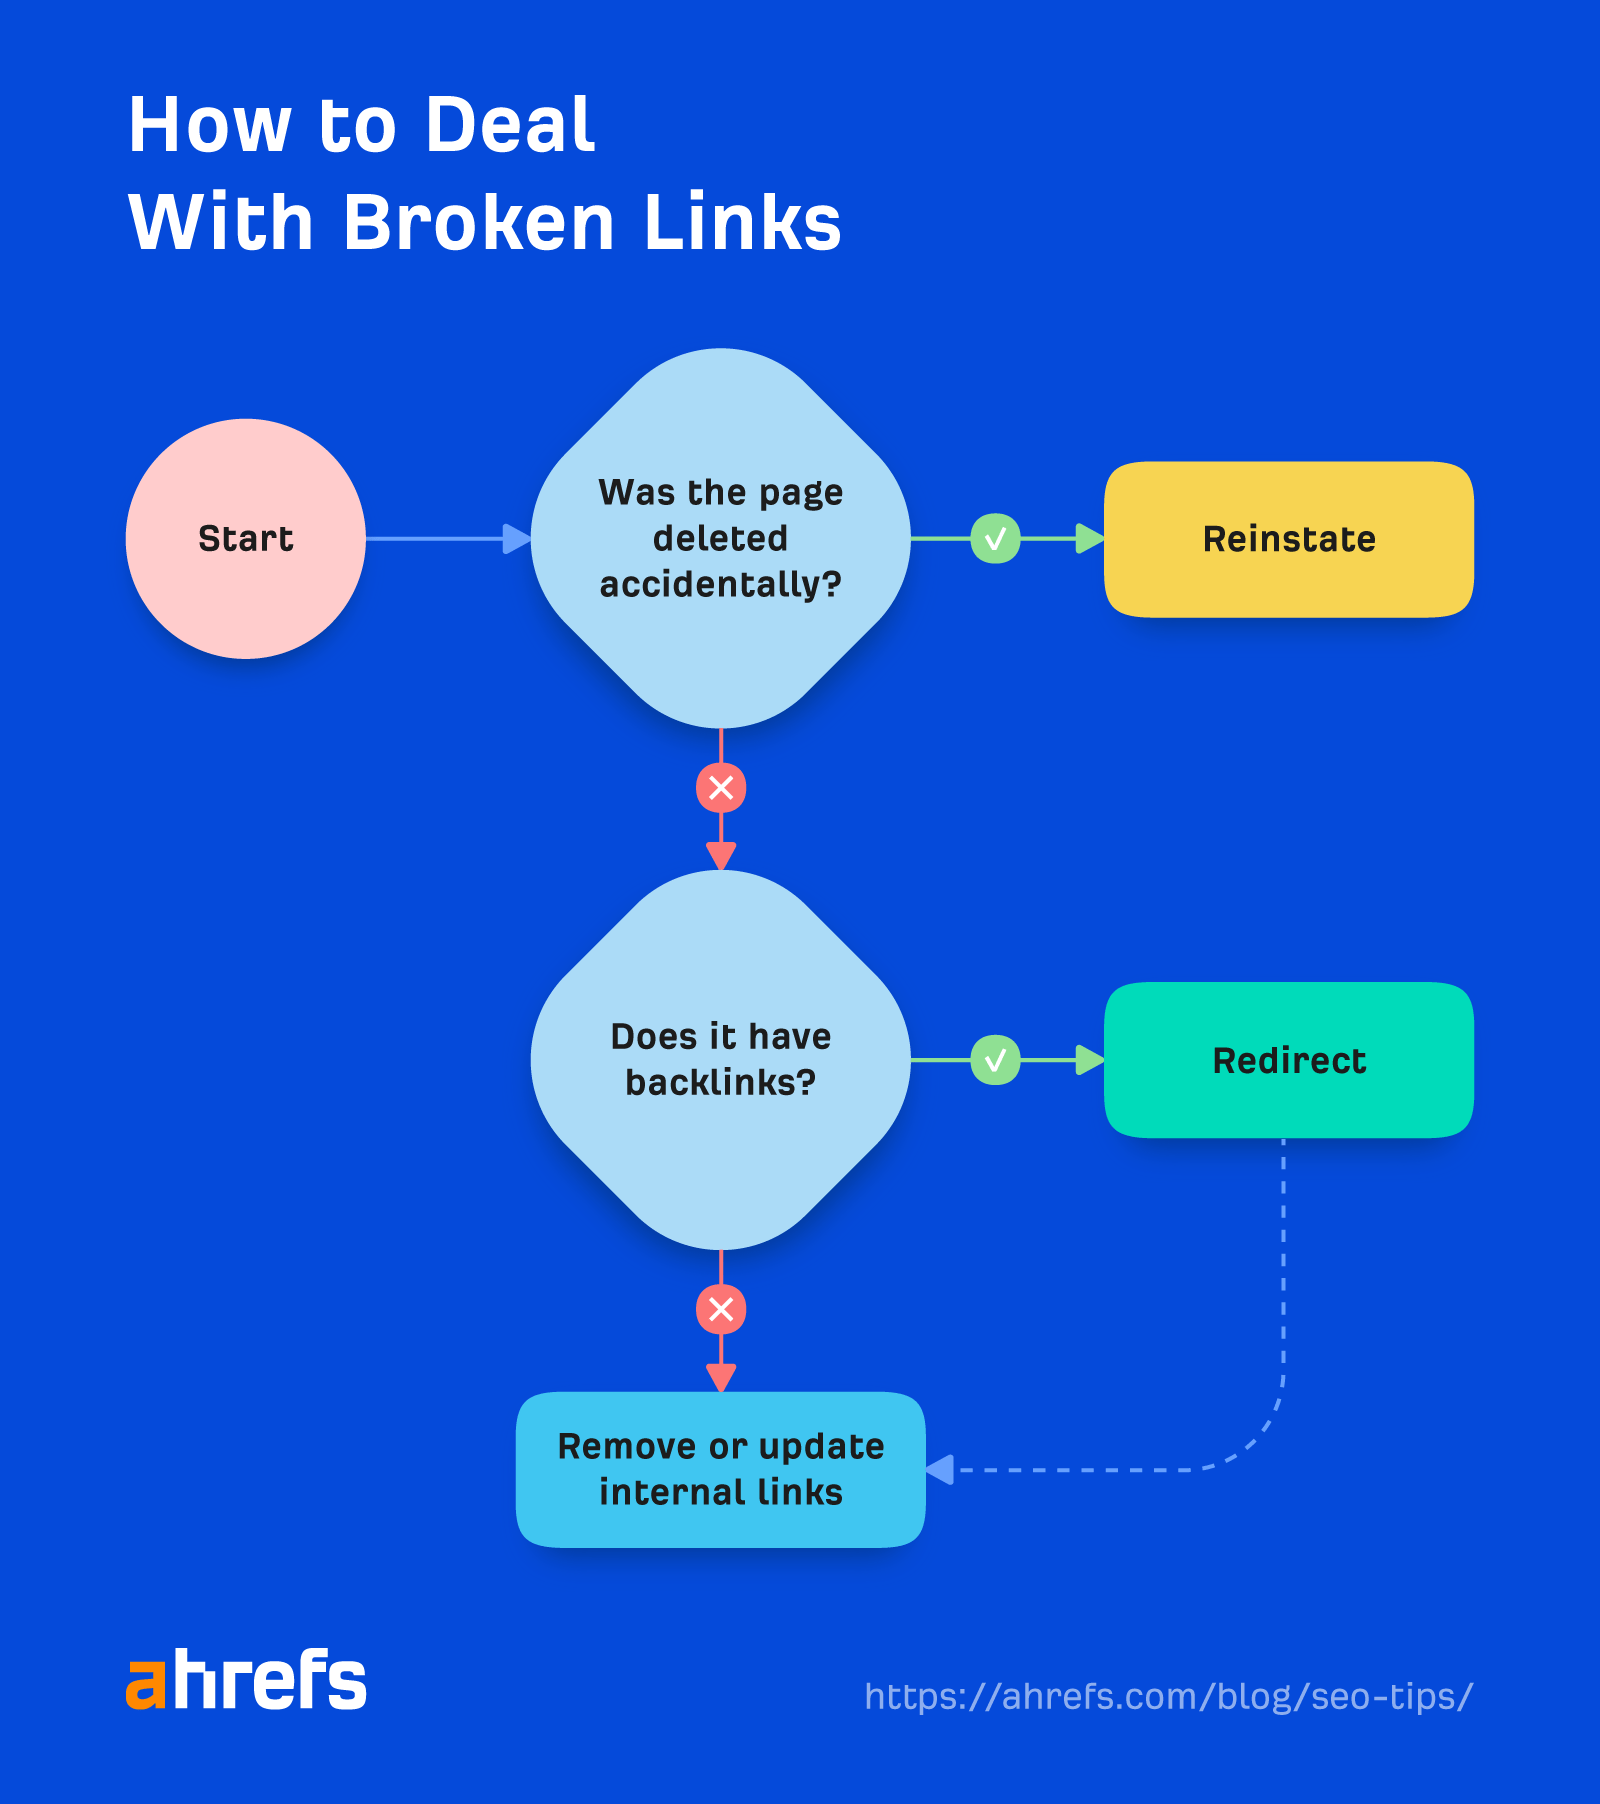 How to deal with broken links, via Ahrefs Blog
